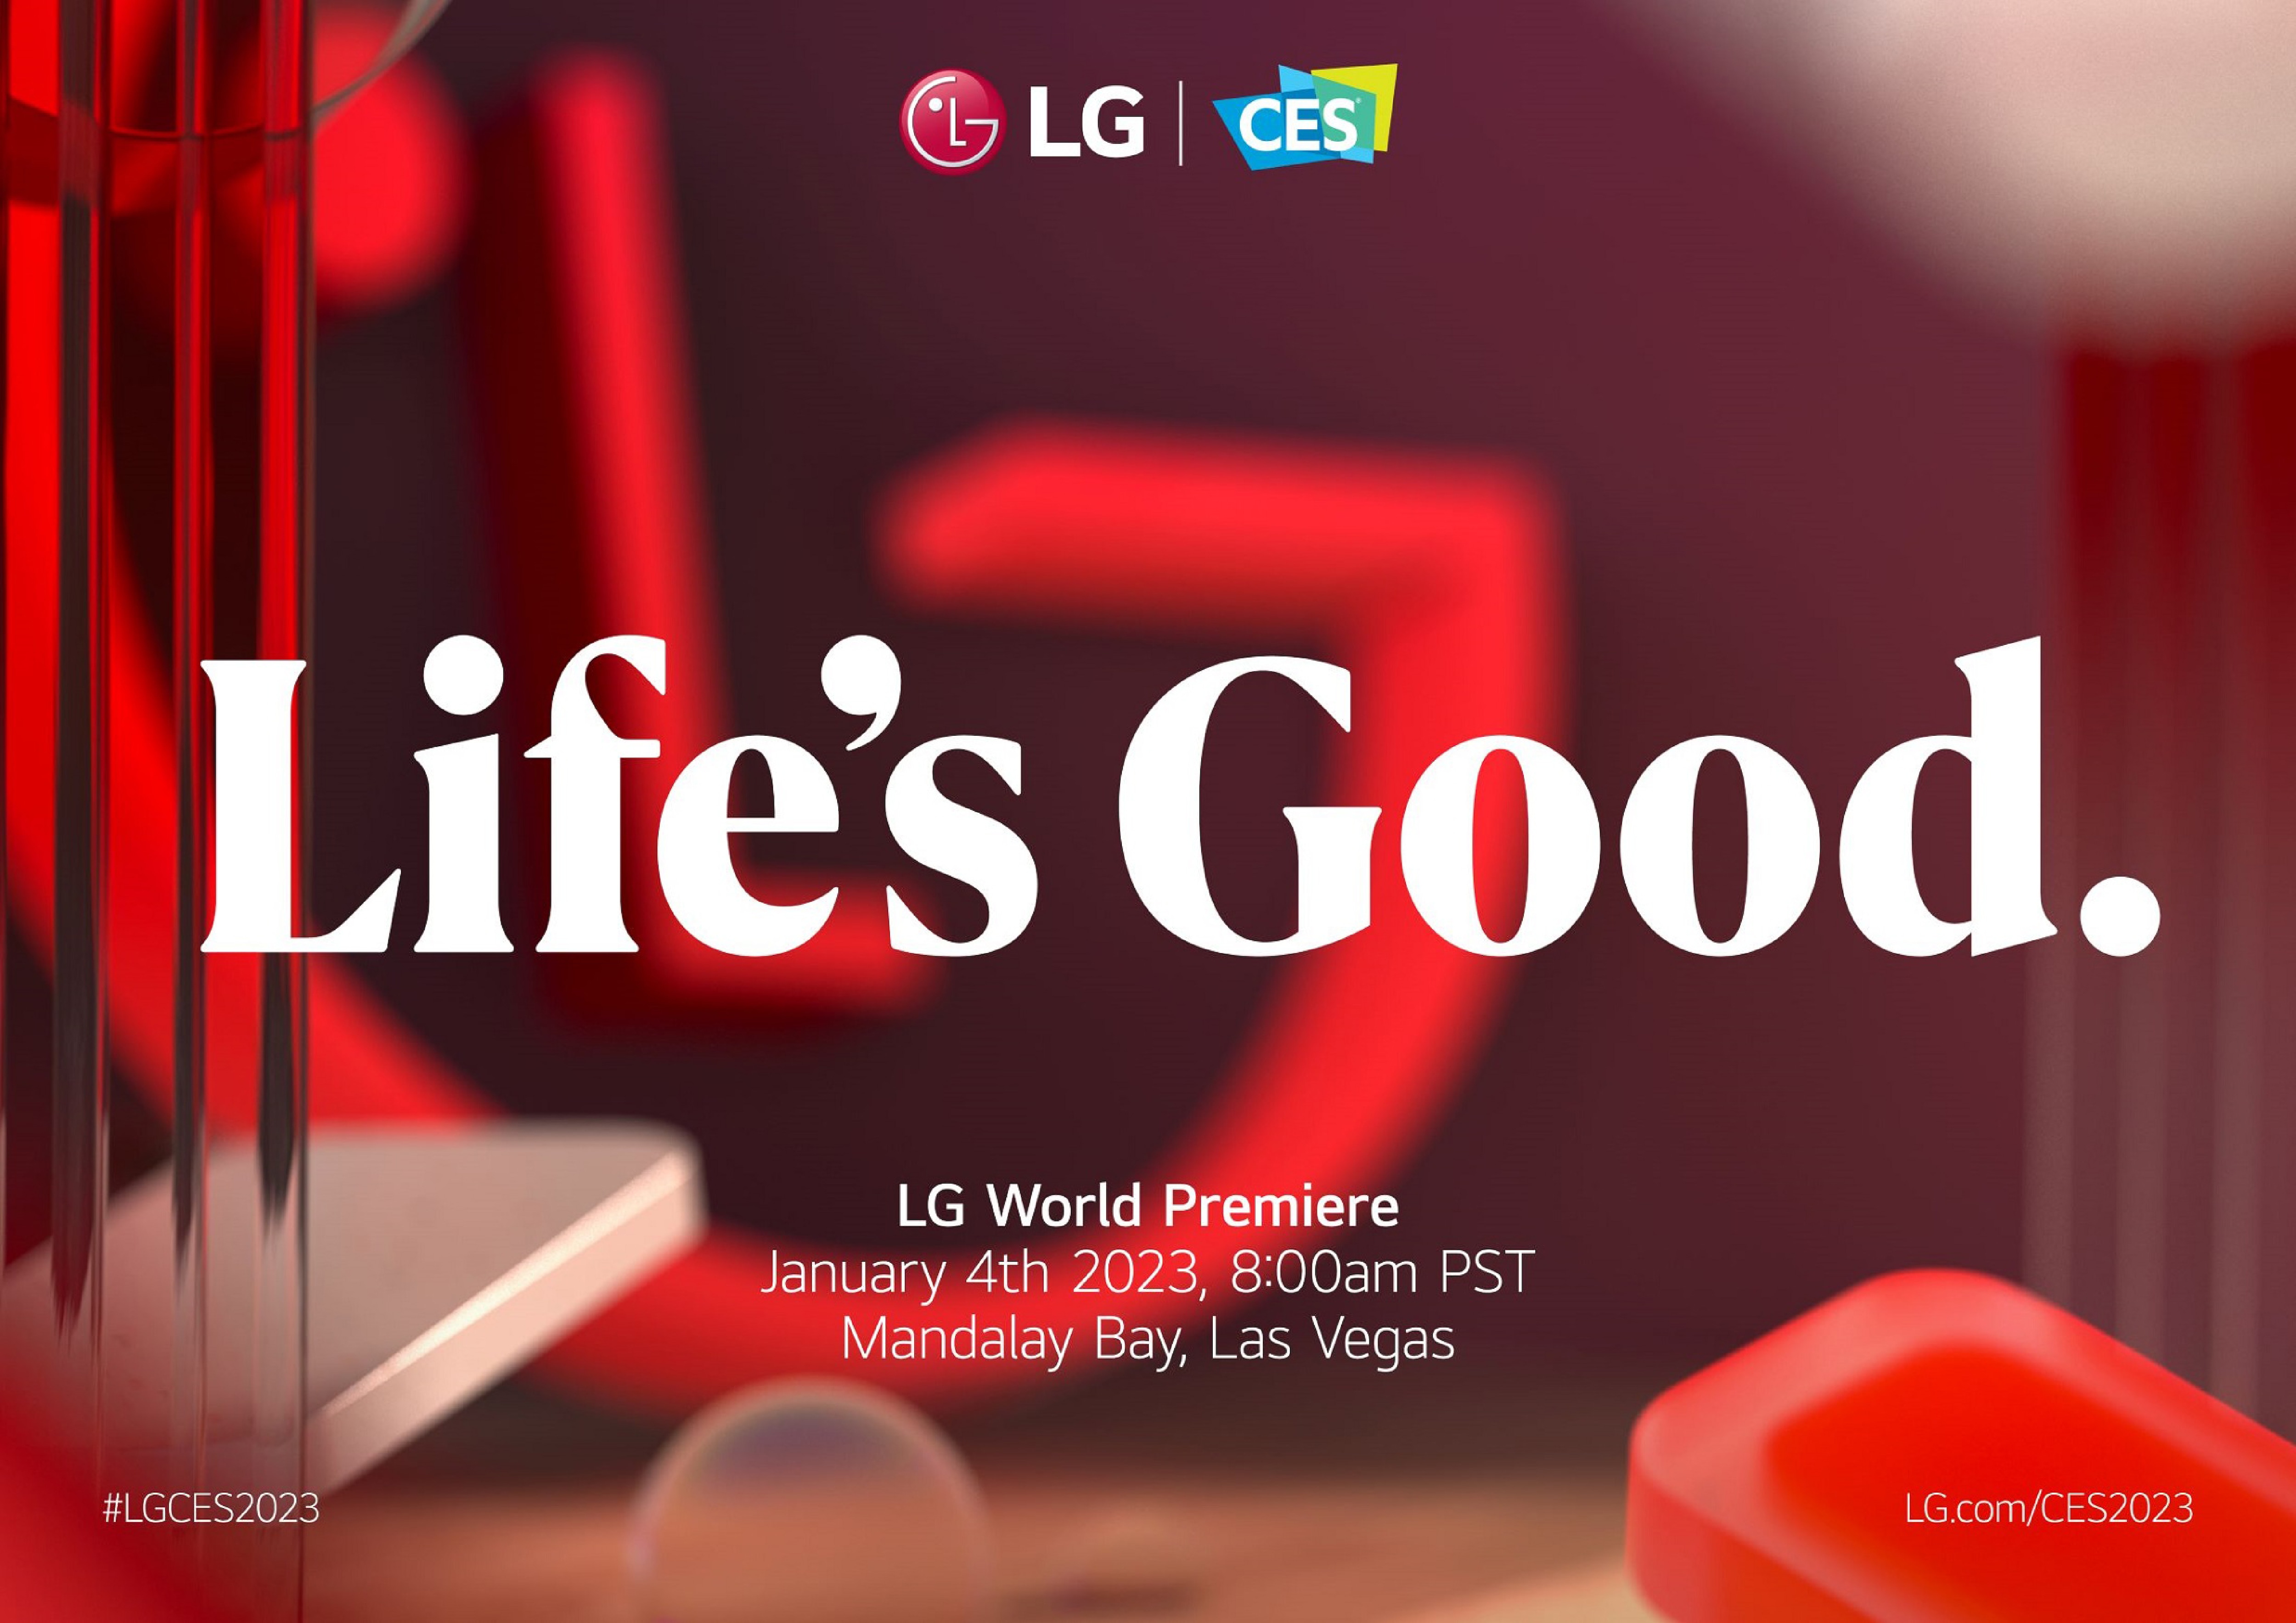 LG Electronics en LinkedIn: True Meaning of Life's Good Revealed at CES 2023